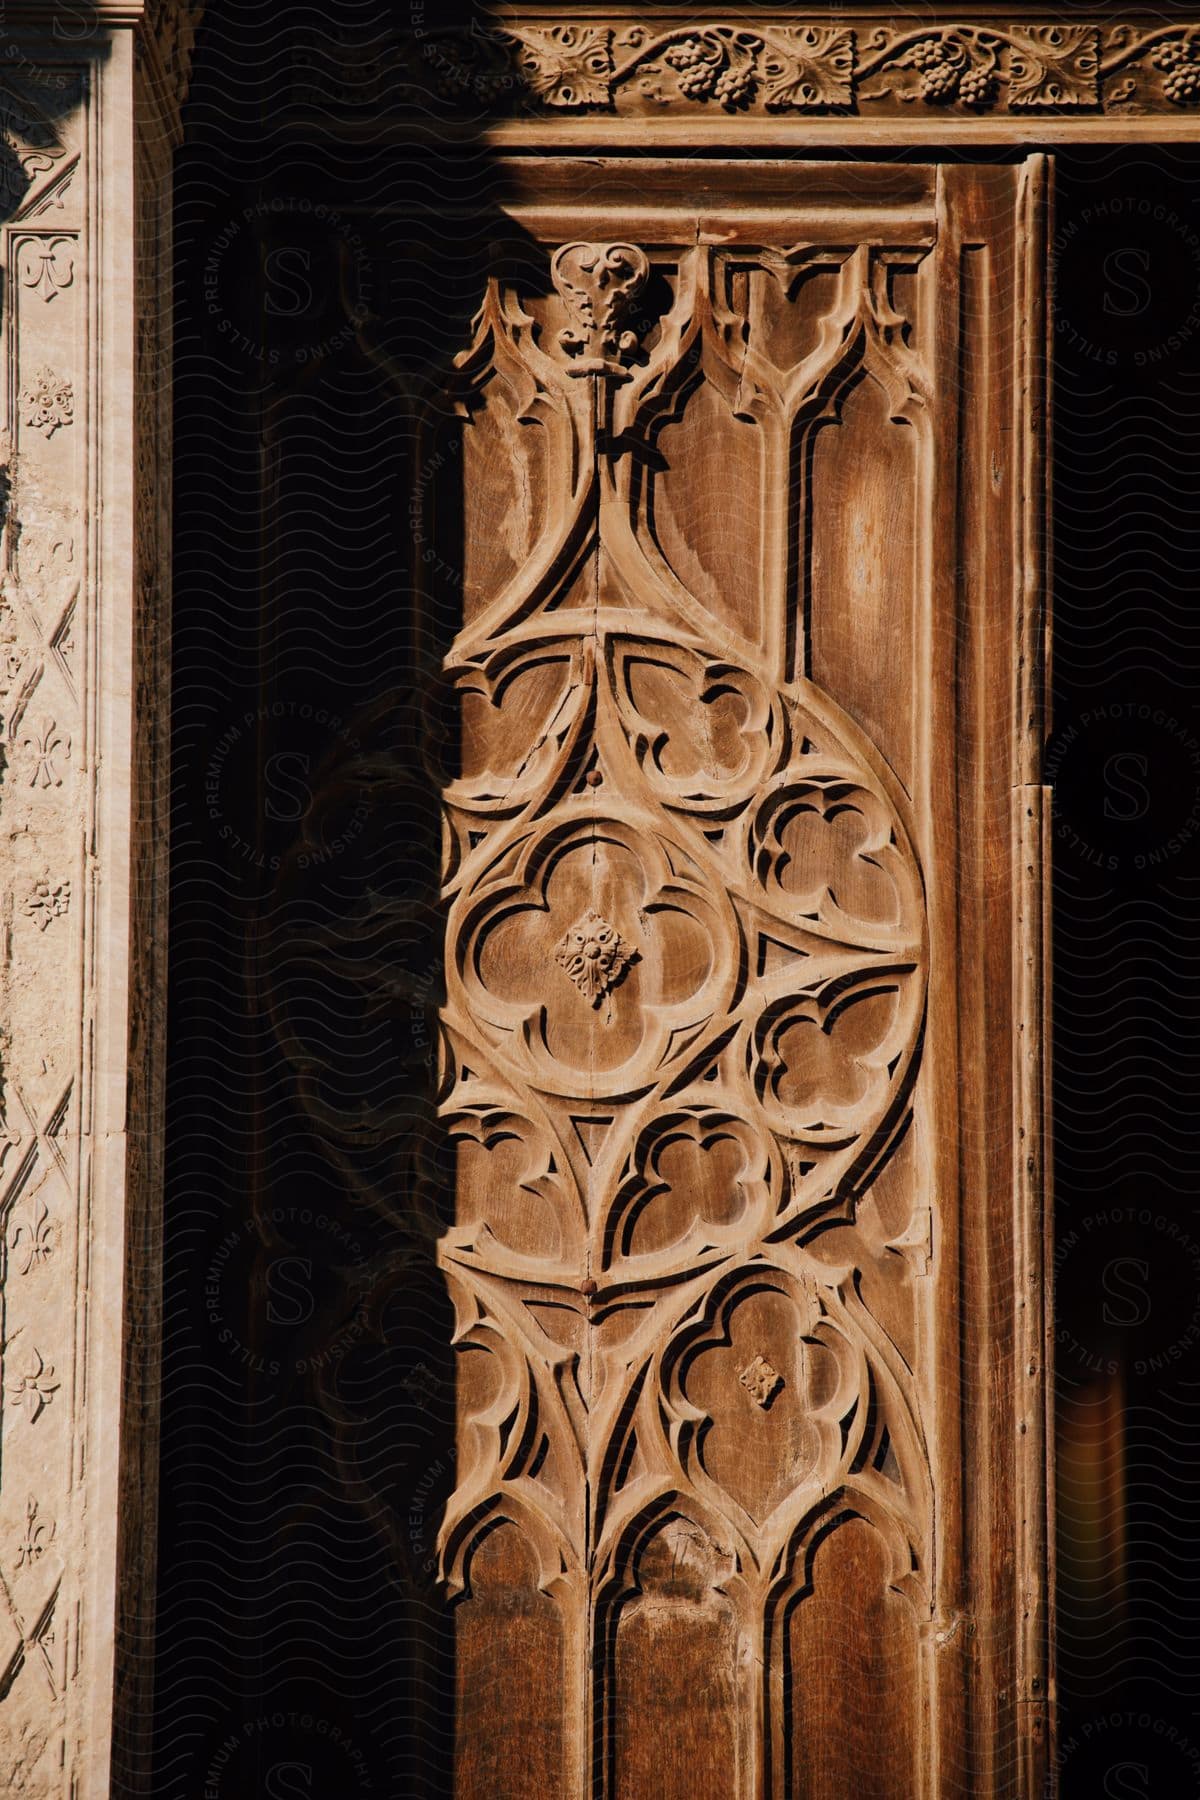 A sunlight-warmed carved wooden door with intricate designs.